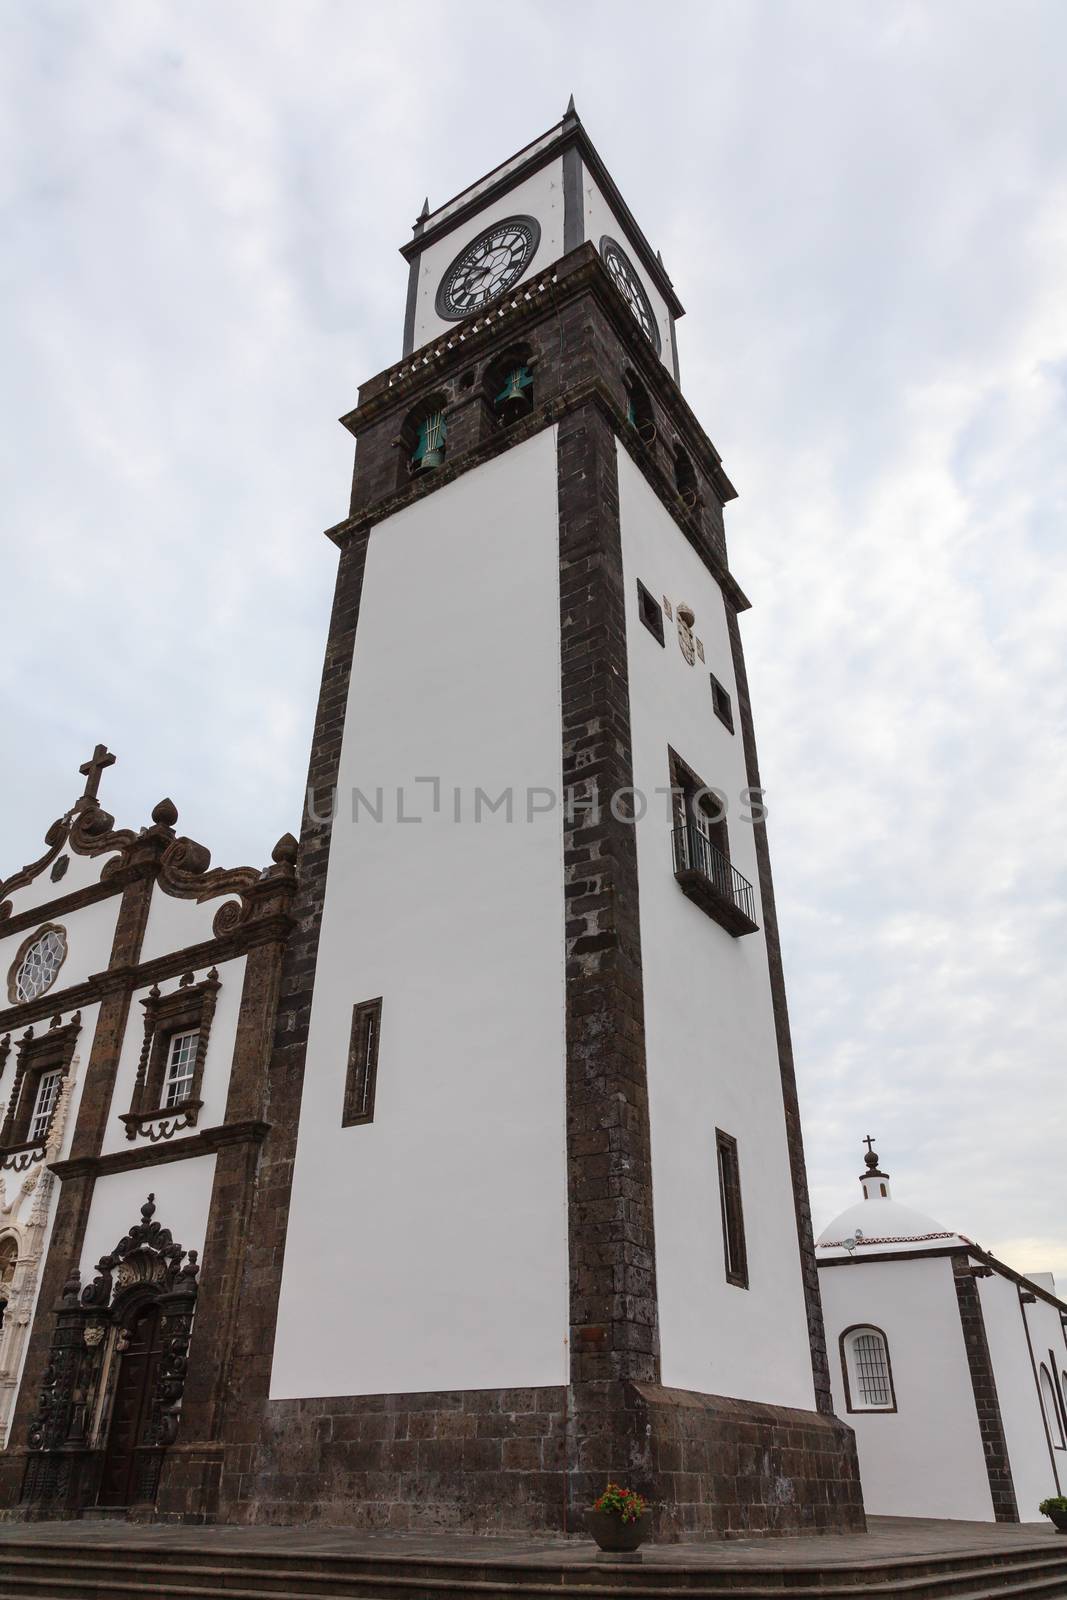 The 16th century church of Sao Sebastiao (also known as Mother Church) is in Ponta Delgada, the capital of Sao Miguel a Portuguese island in the Azores in the Atlantic Ocean.